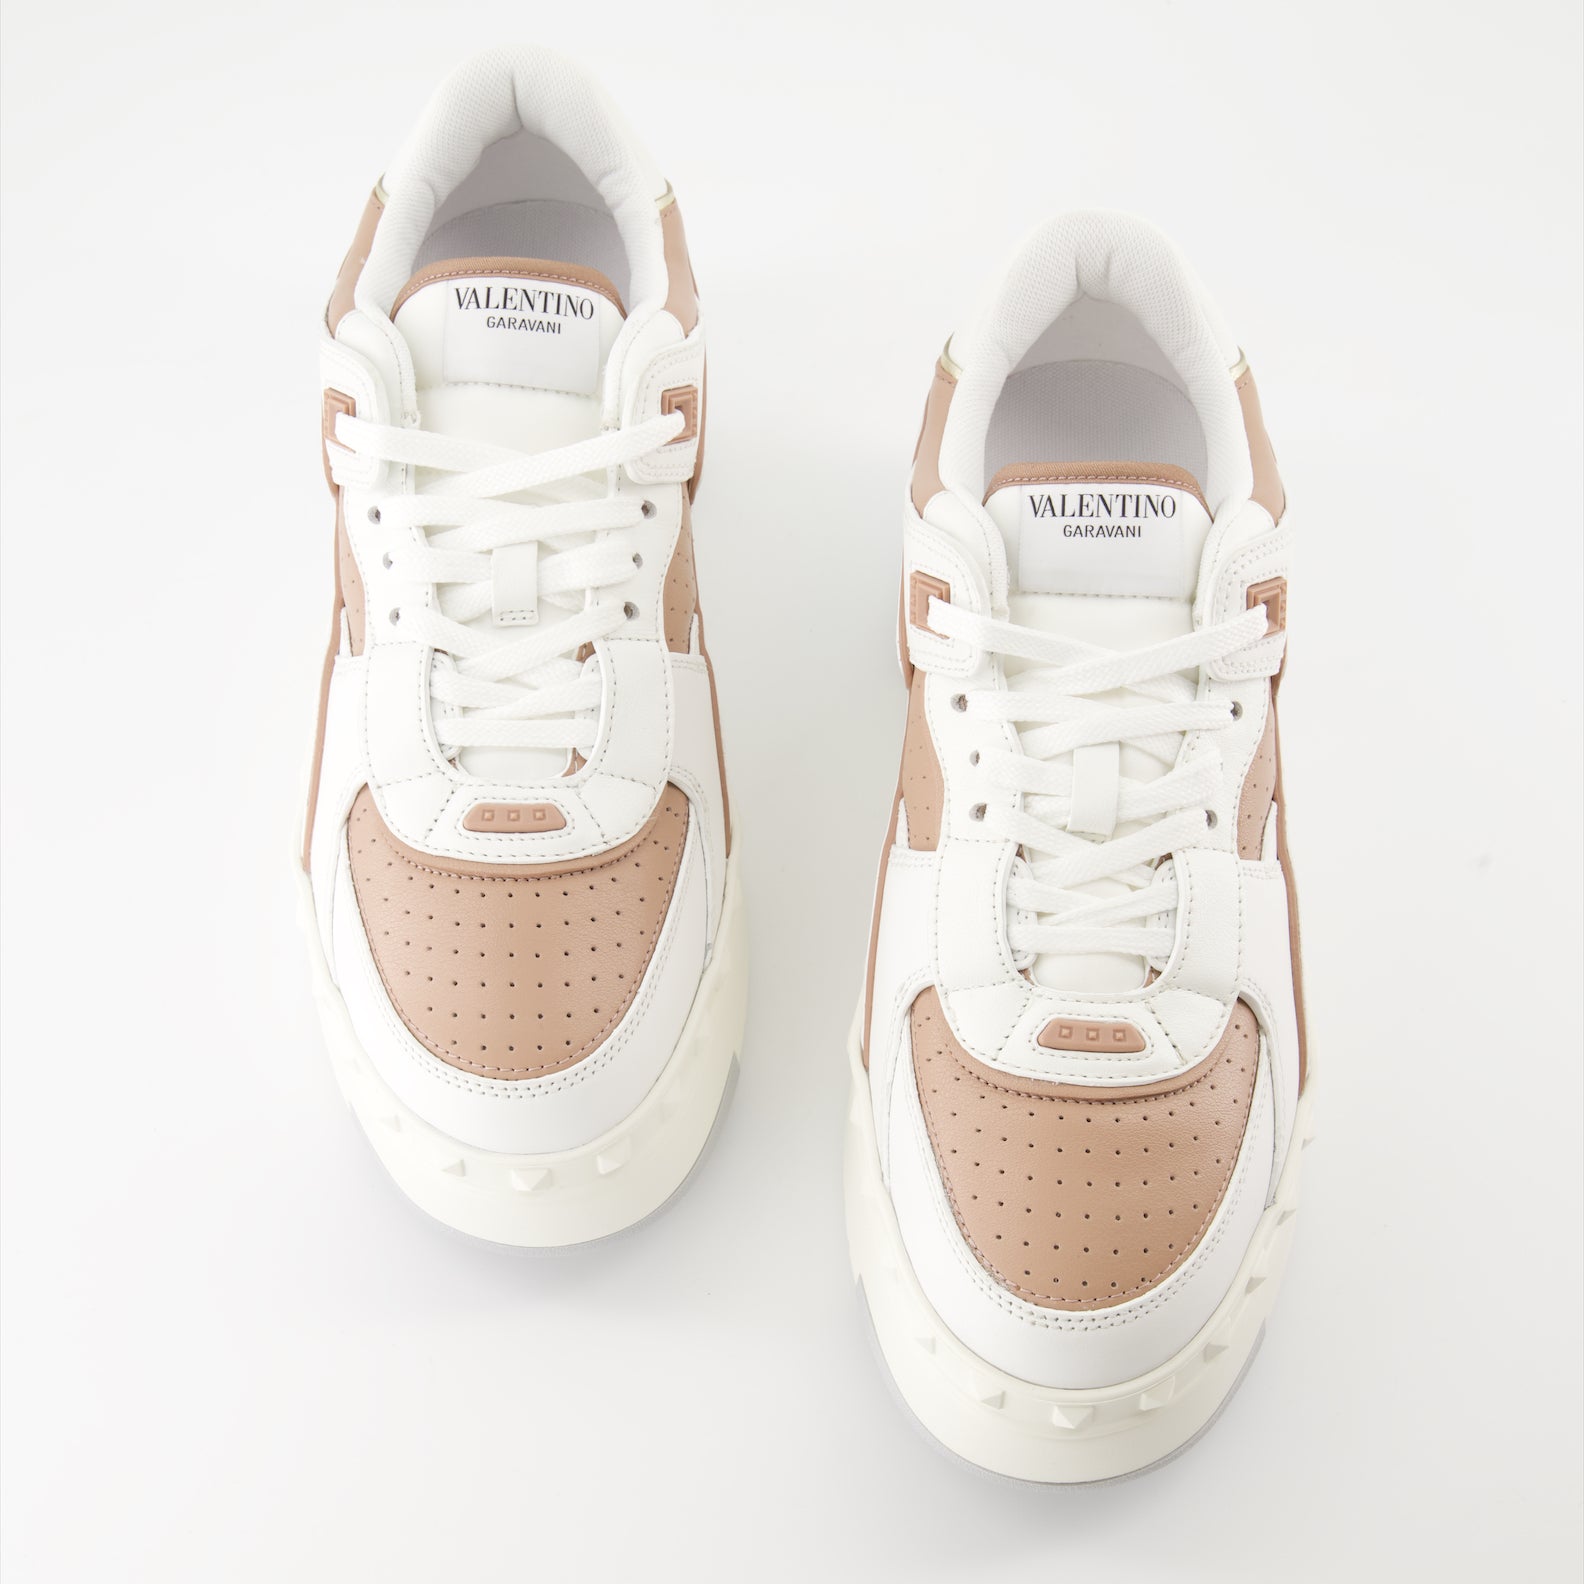 Freedots XL sneakers